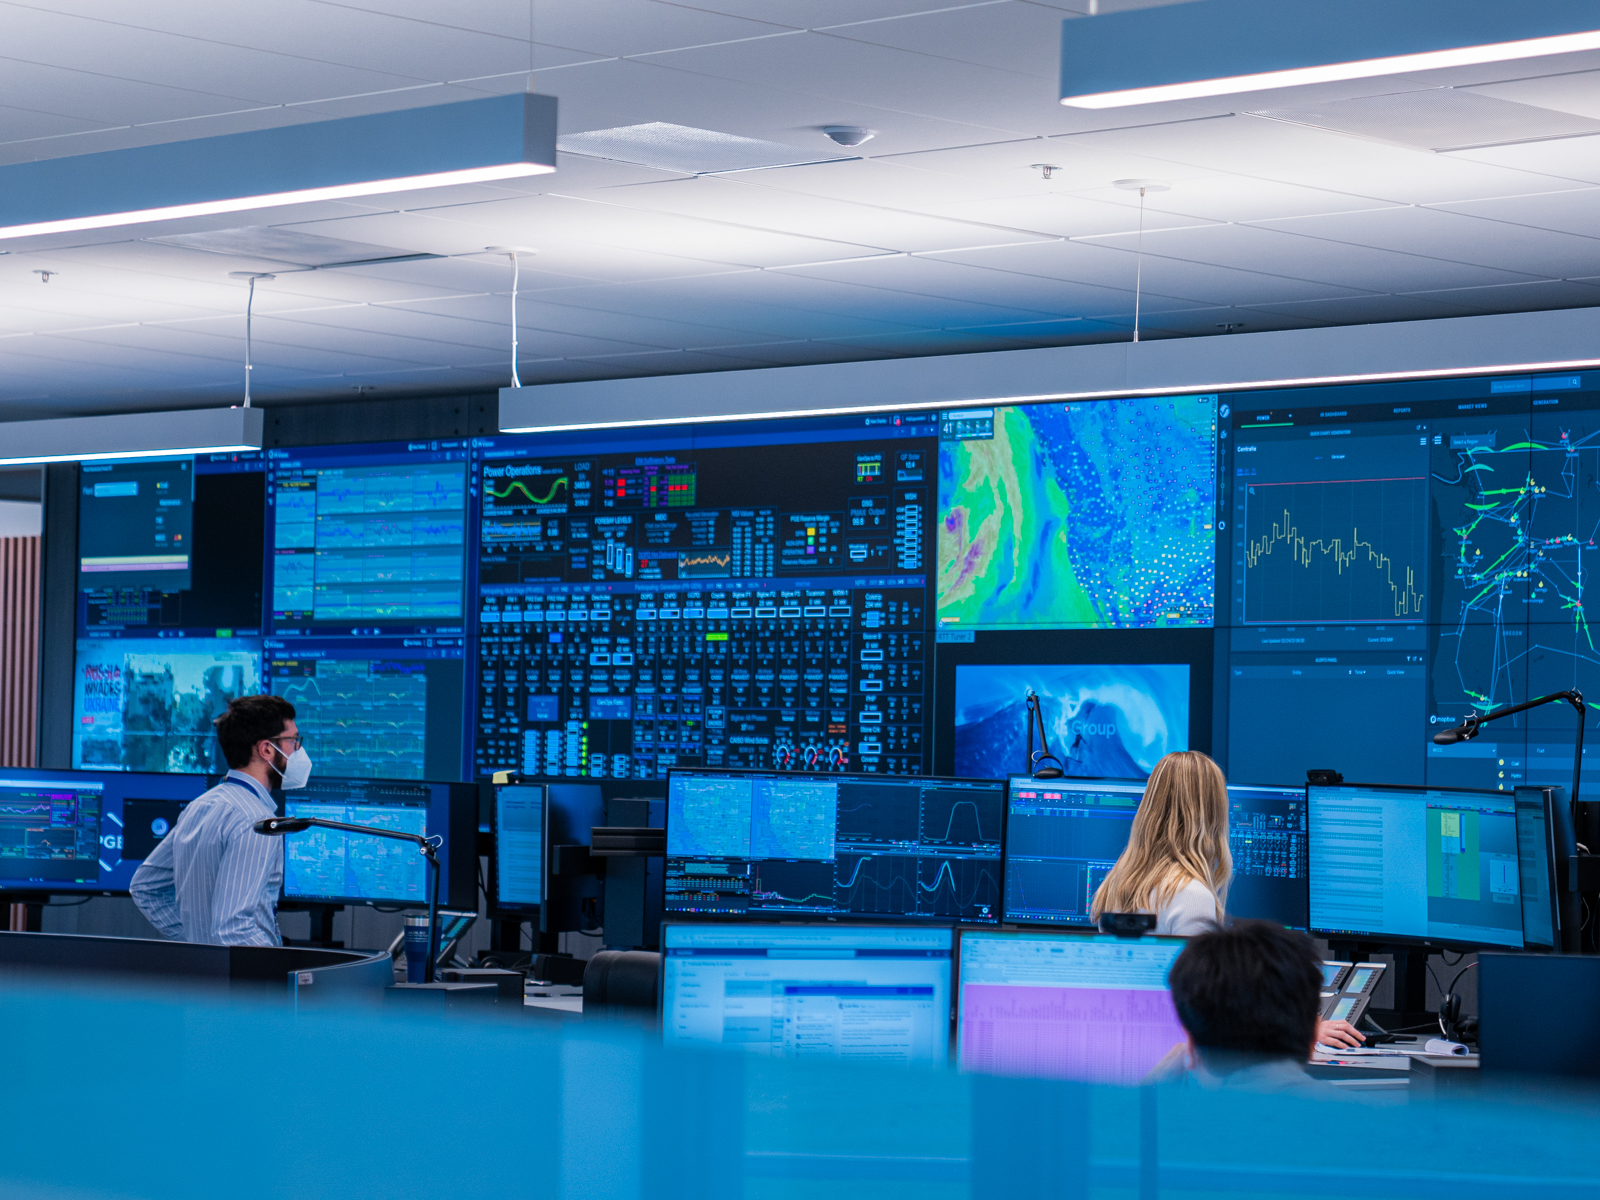 People monitoring screens at the Integrated operations center IOC